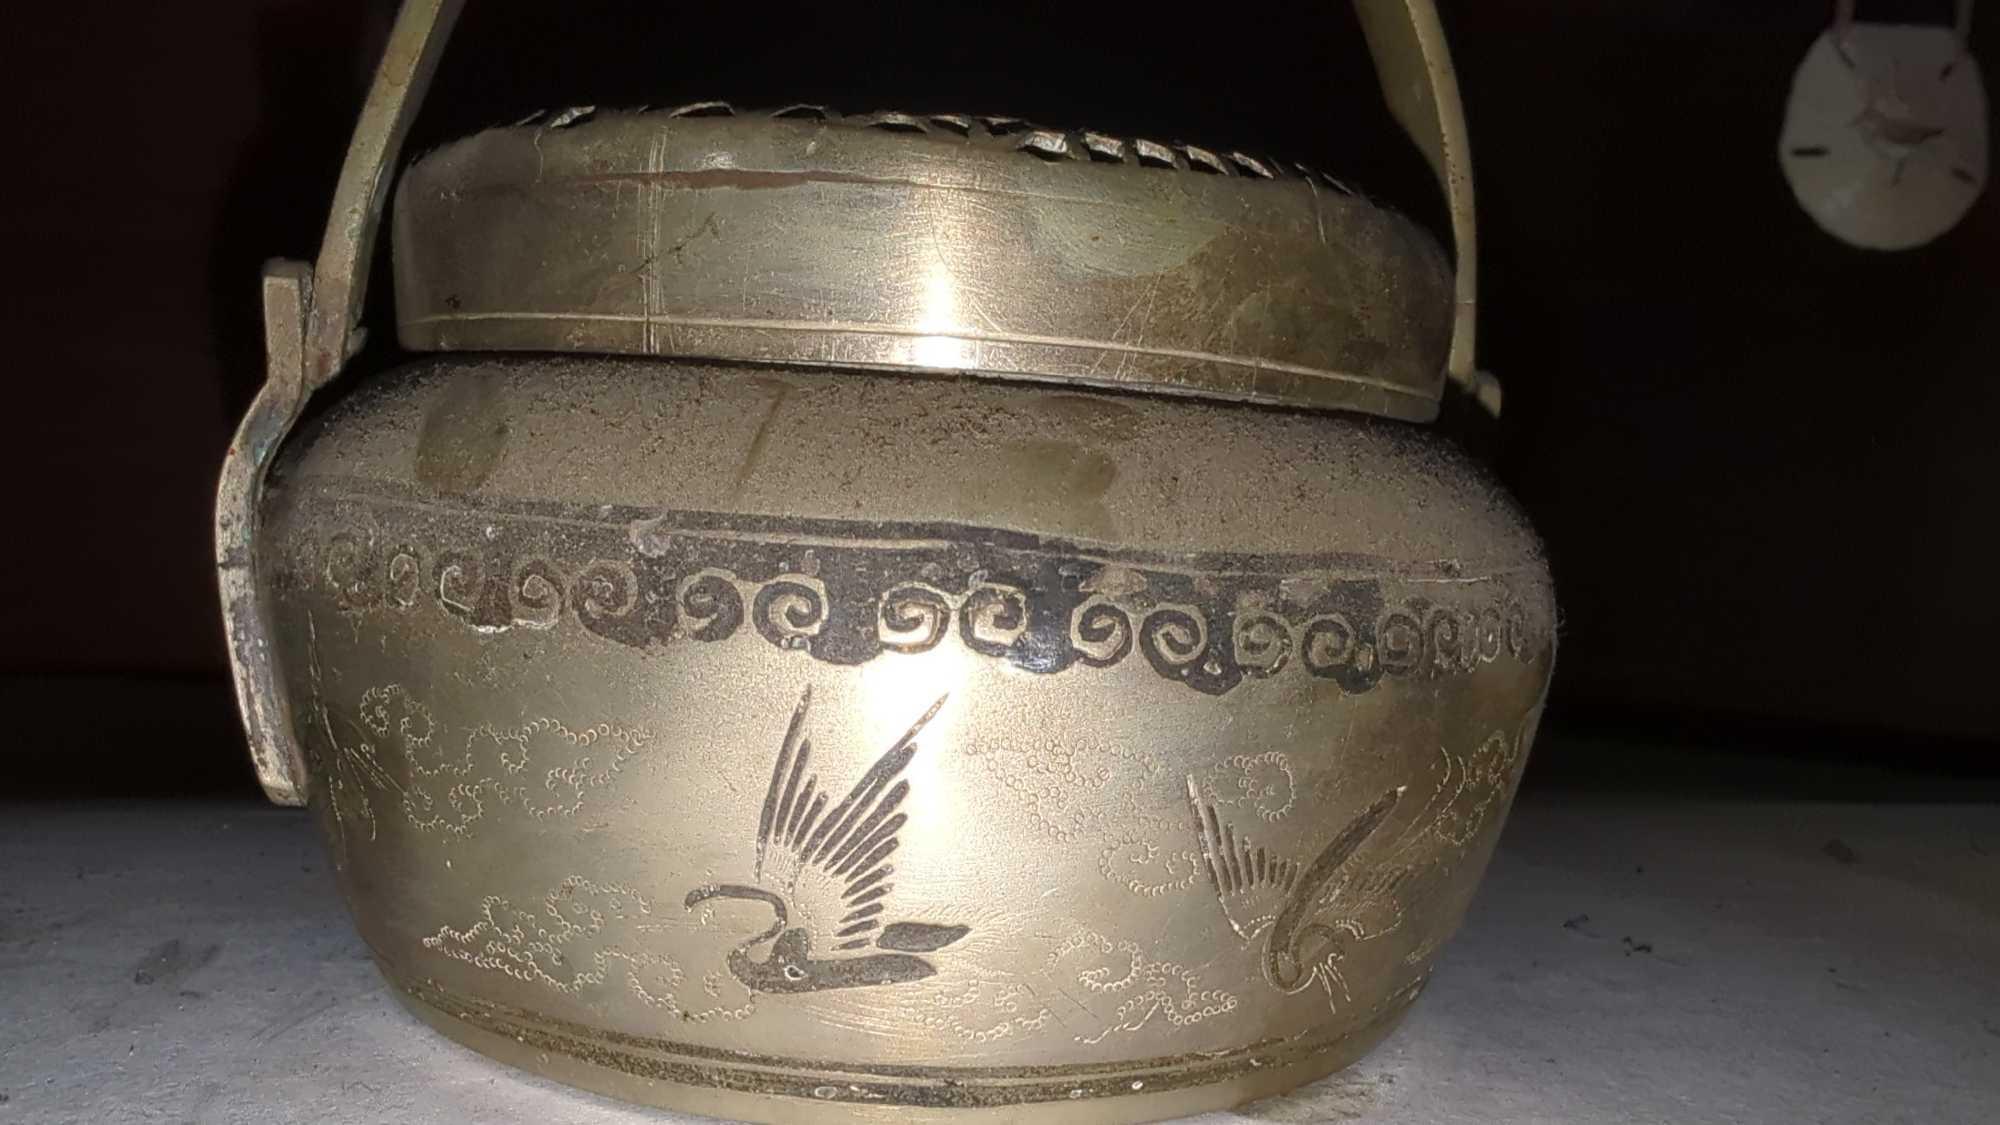 (FOY) ANTIQUE CHINESE BRASS HAND WARMER, DEPICTS FLYING CRANES ON THE BASE, NO OTHER IDENTIFYING